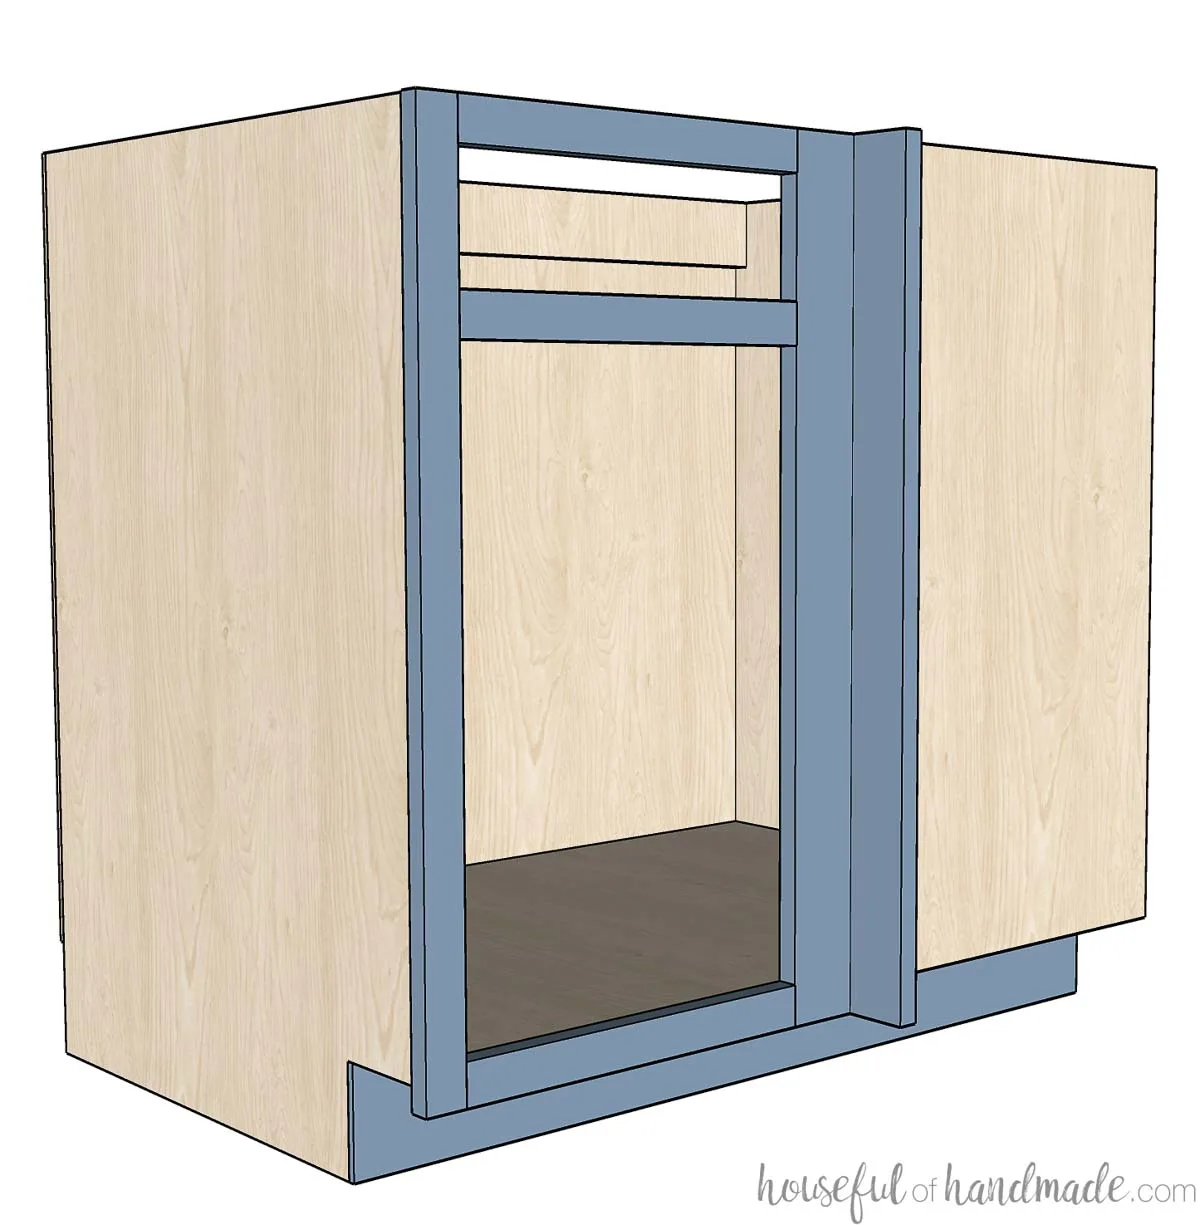 3D Drawing of a blind corner base cabinet box. 